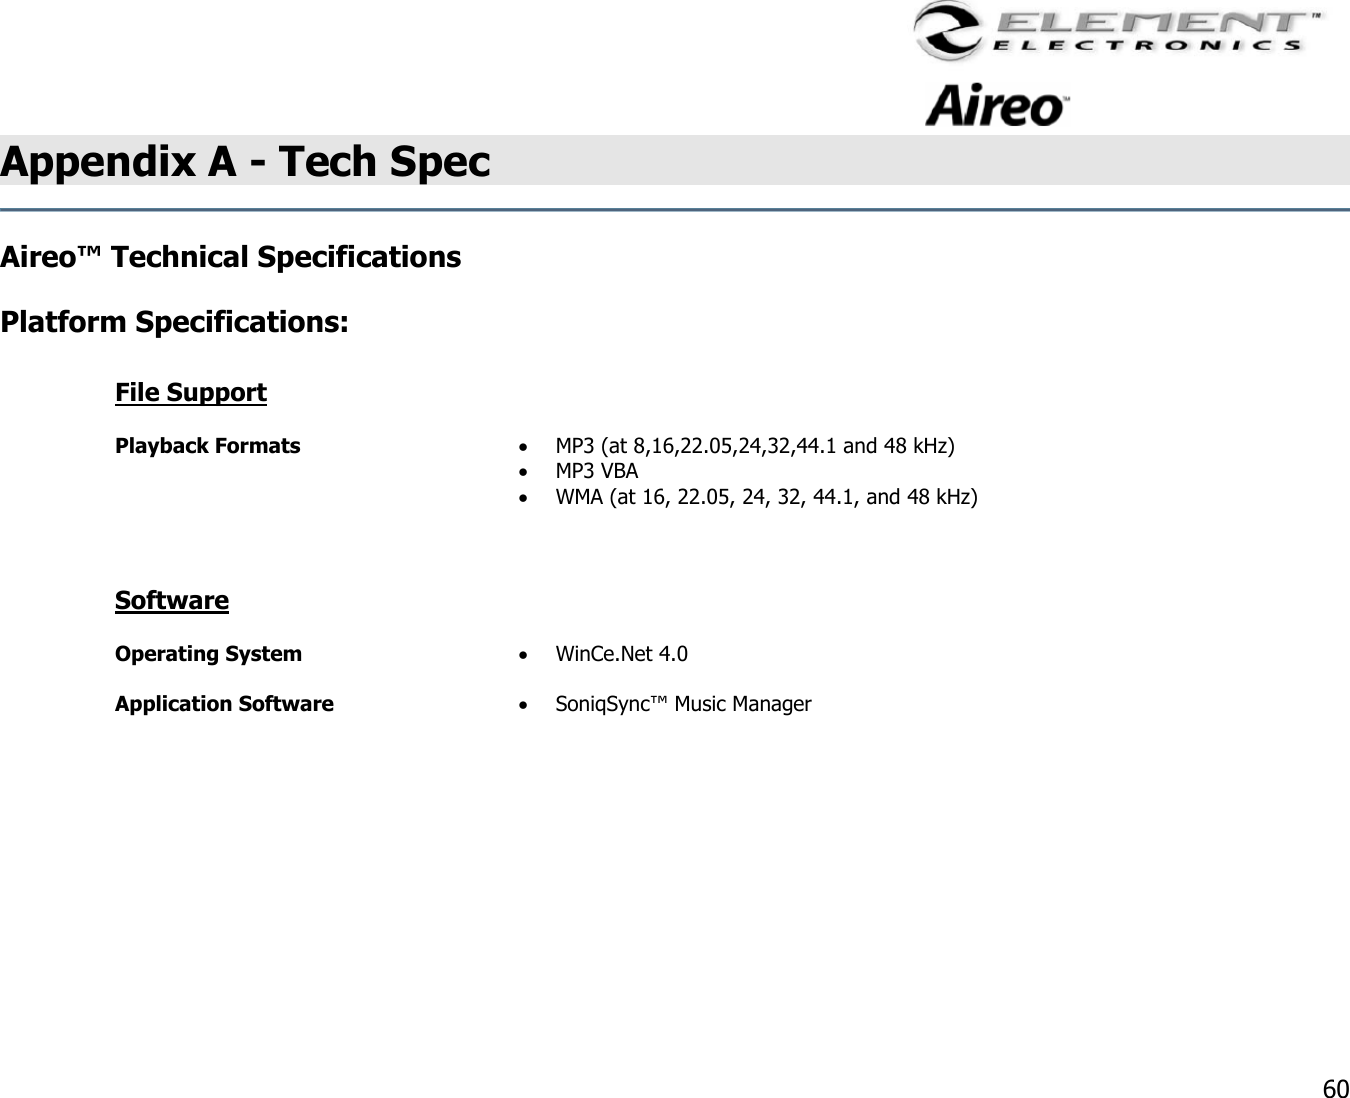                                                                                    60 Appendix A - Tech Spec  Aireo™ Technical Specifications   Platform Specifications:   File Support  Playback Formats  •  MP3 (at 8,16,22.05,24,32,44.1 and 48 kHz) •  MP3 VBA •  WMA (at 16, 22.05, 24, 32, 44.1, and 48 kHz)   Software  Operating System  •  WinCe.Net 4.0 Application Software  •  SoniqSync™ Music Manager       